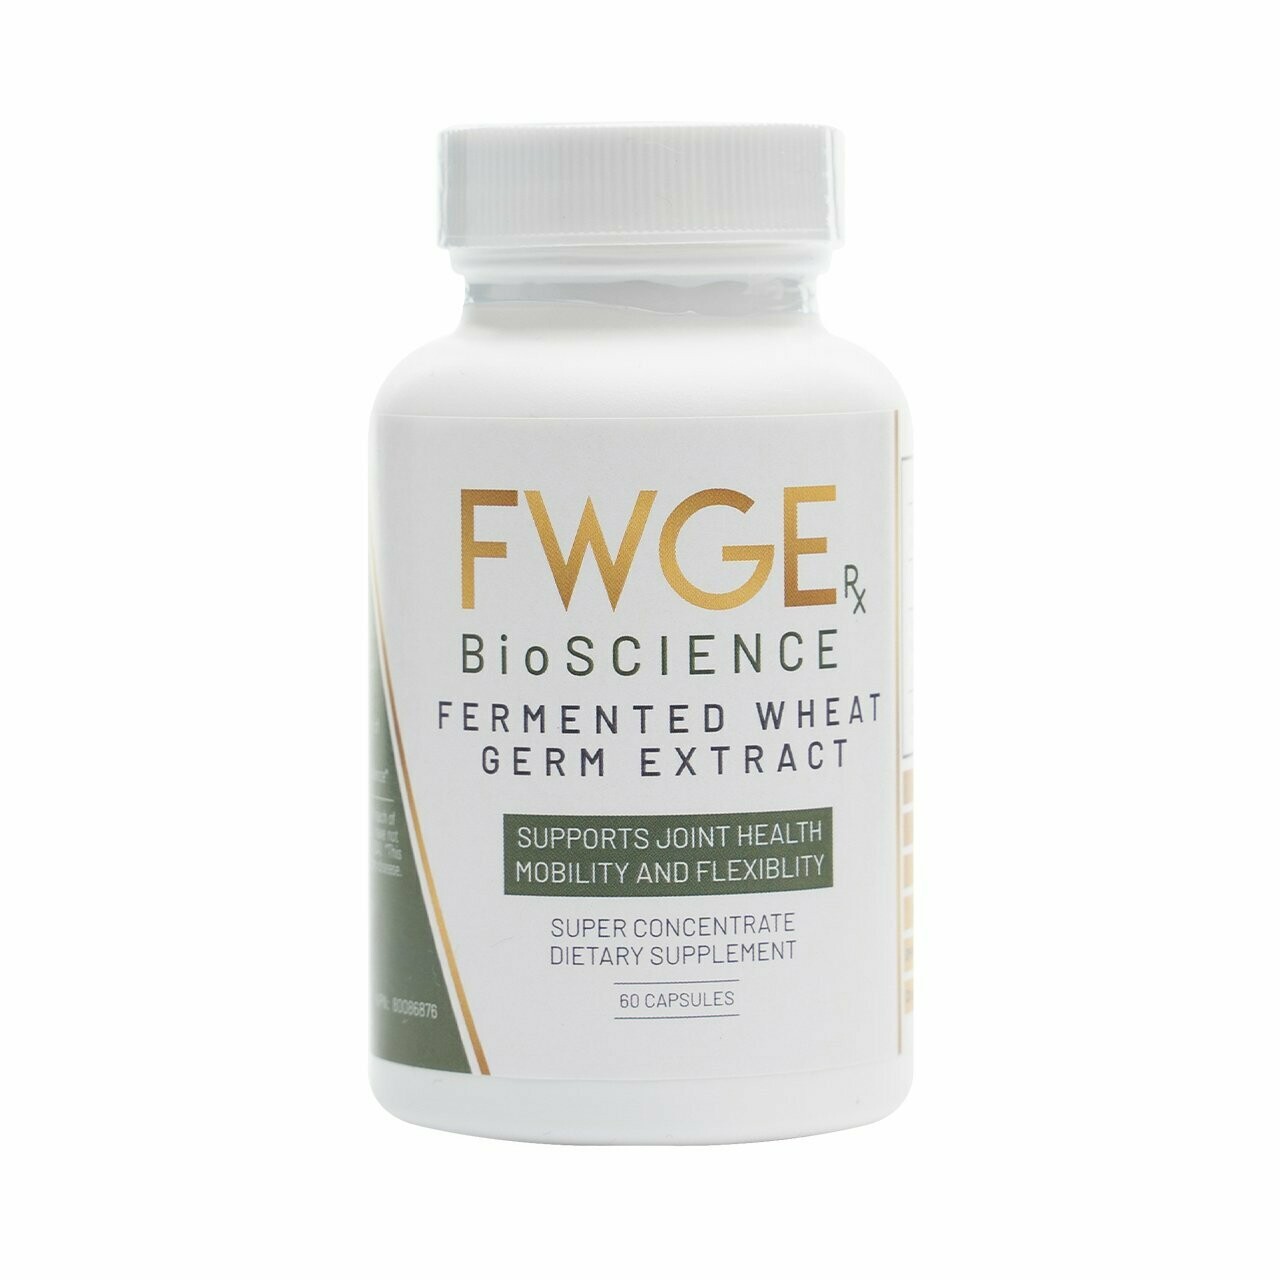 FWGE Rx BioSCIENCE - SUPPORTS JOINT HEALTH MOBILITY AND FLEXIBILITY - Capsules